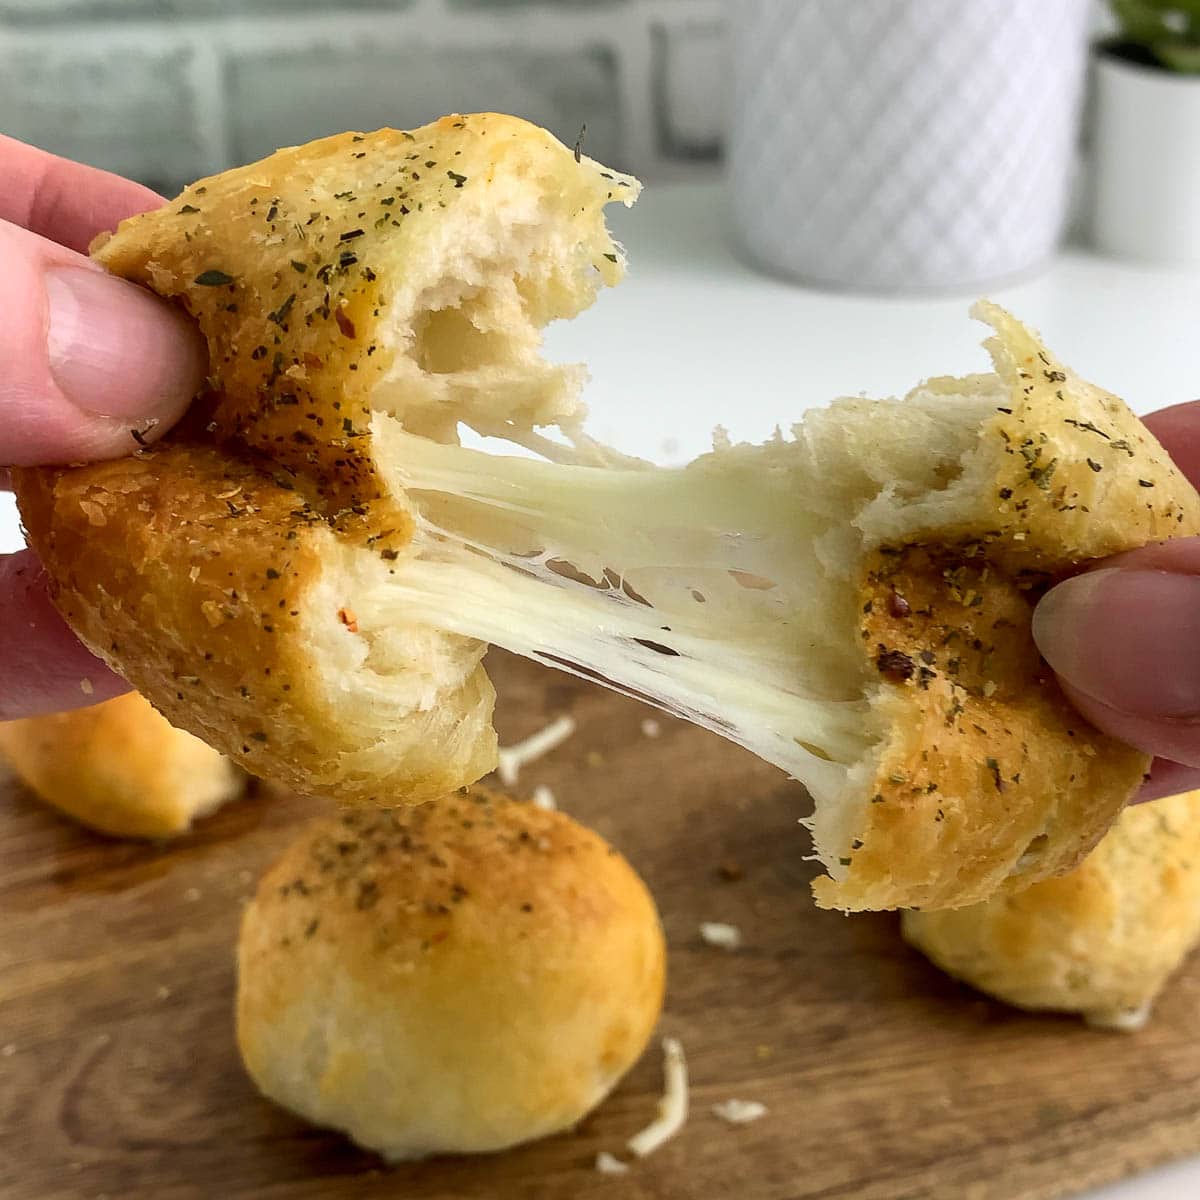 Pulling apart a garlic cheese ball filled with stringy mozzarella cheese.